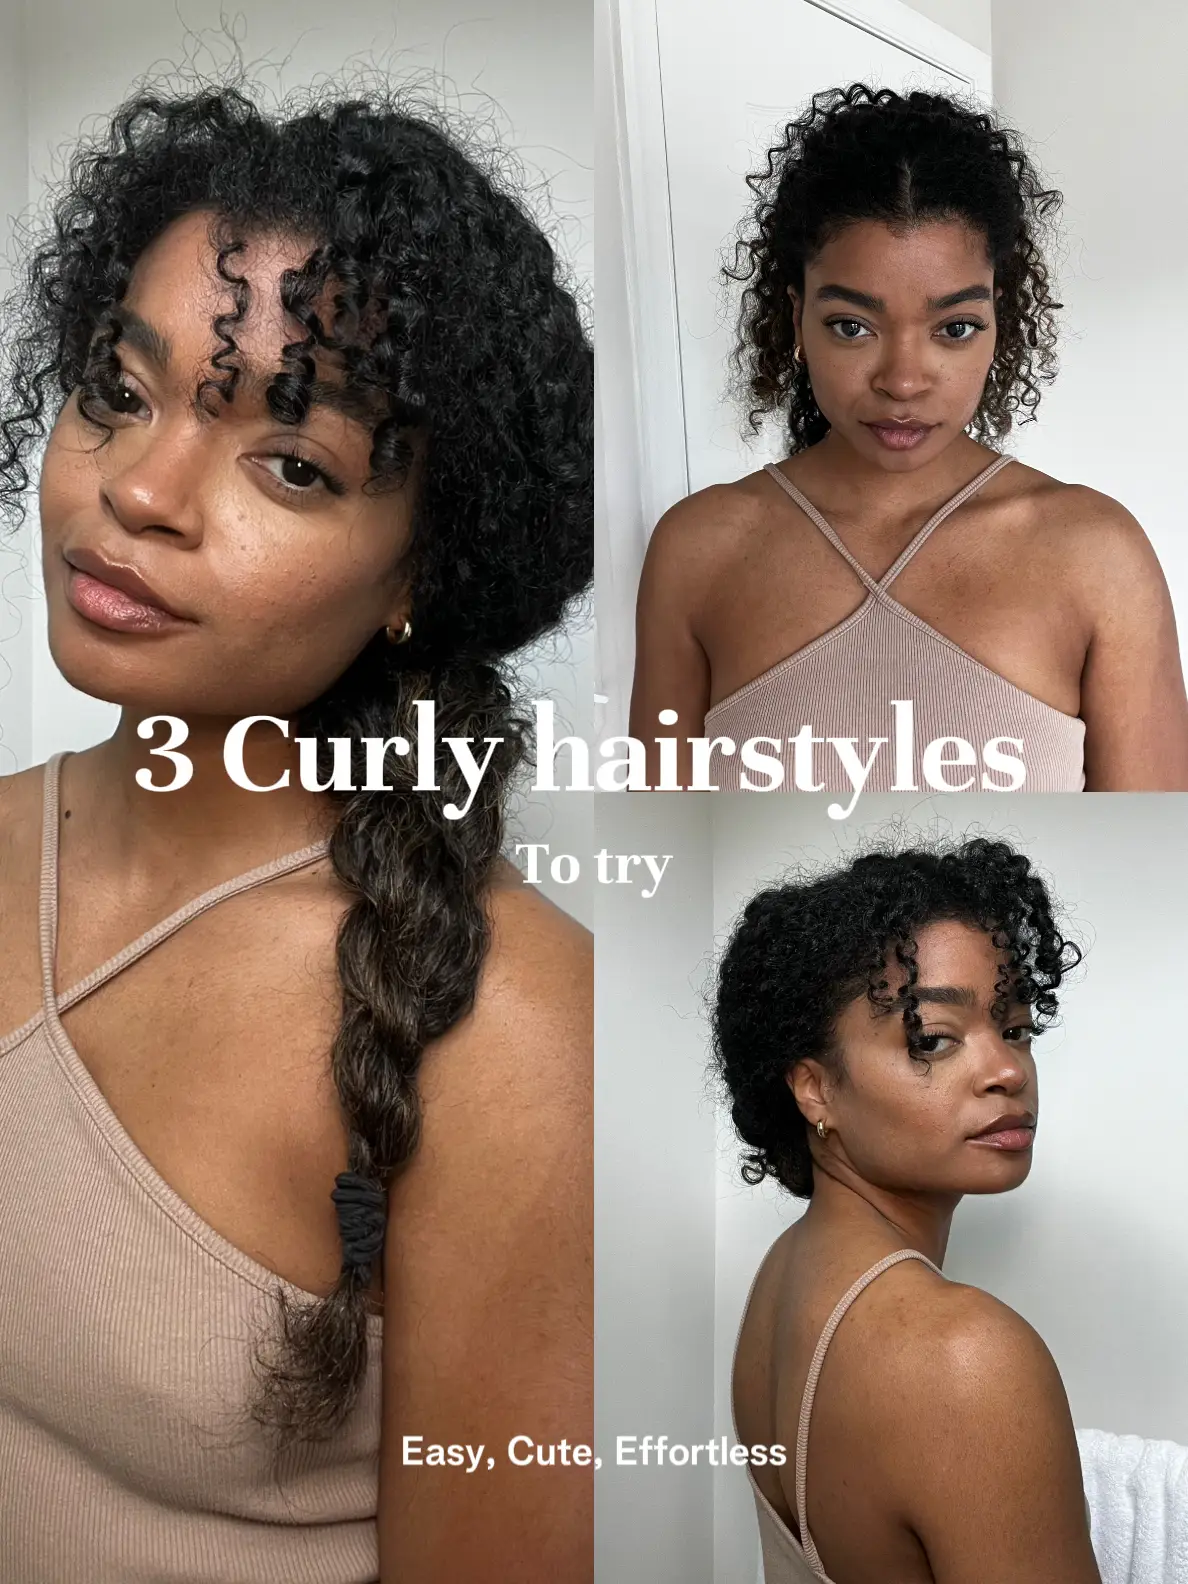 Cool Girl” Curly Hairstyle! would you try it? 🫶🏽 #curlyhair #curls , Cute  Hairstyles, haircuts for curly hair 